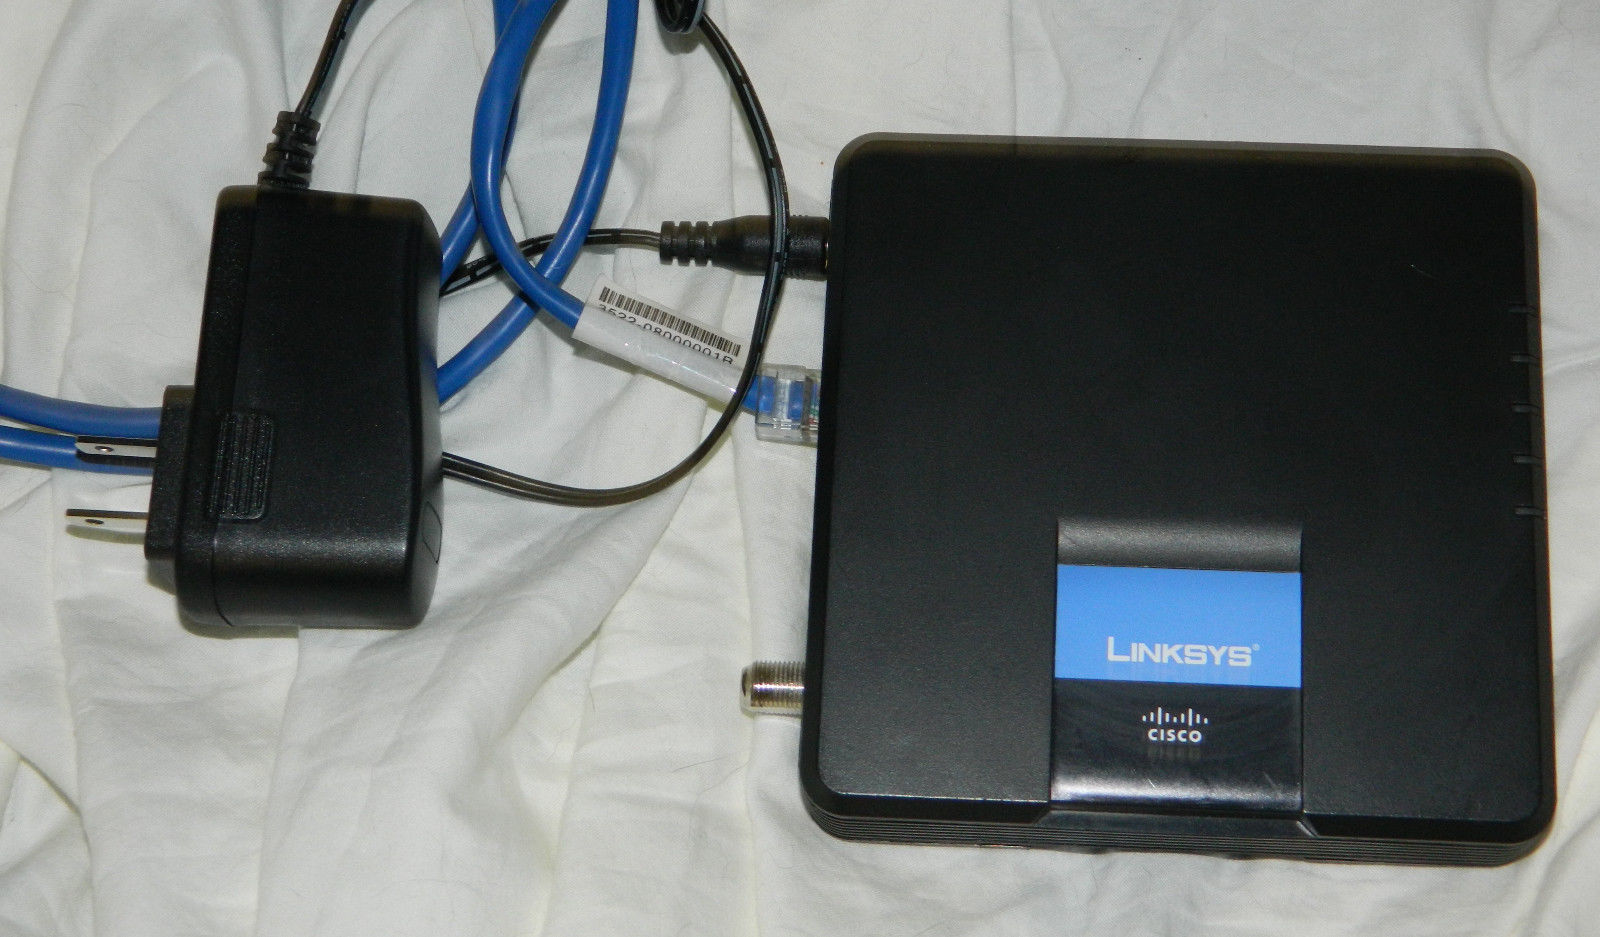 LINKSYS Cable Modem 100 Mbps model # CM100 with Ethernet Cable and Power Supply - $15.85